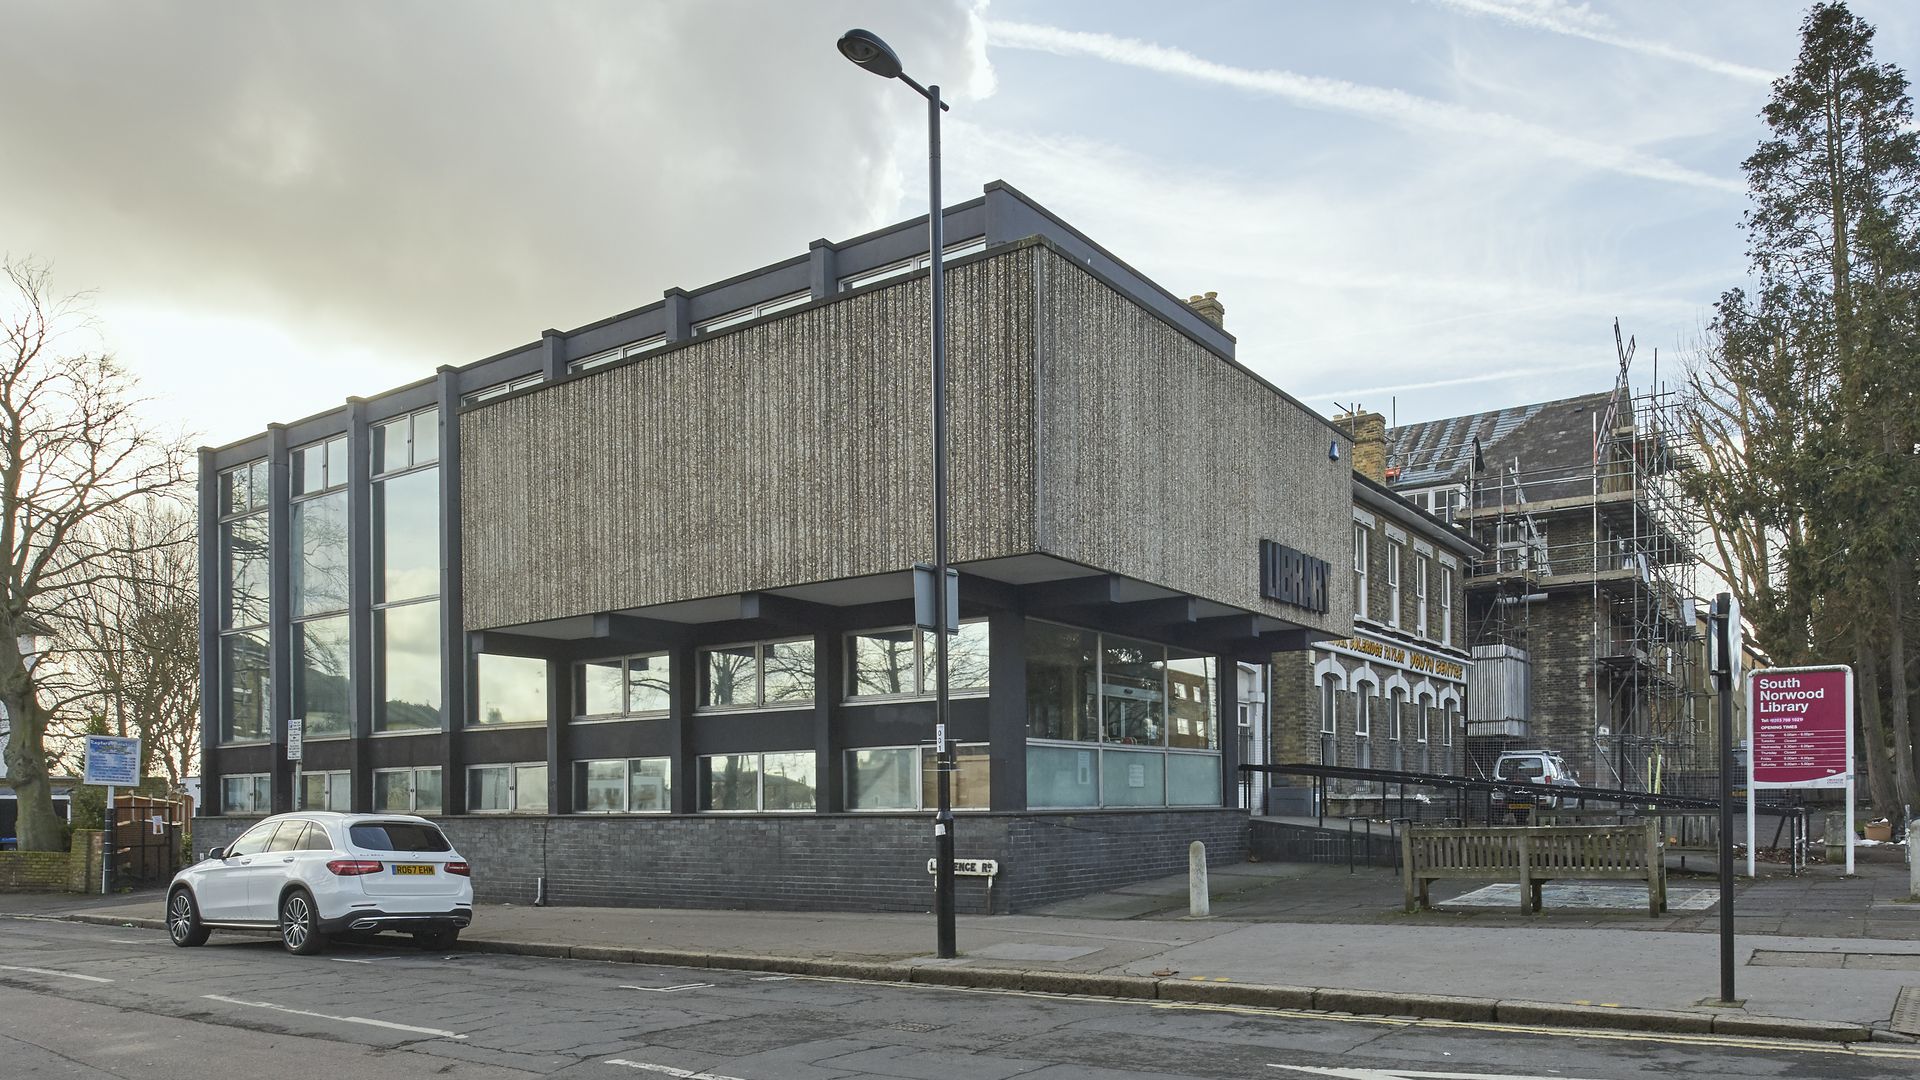 South Norwood library